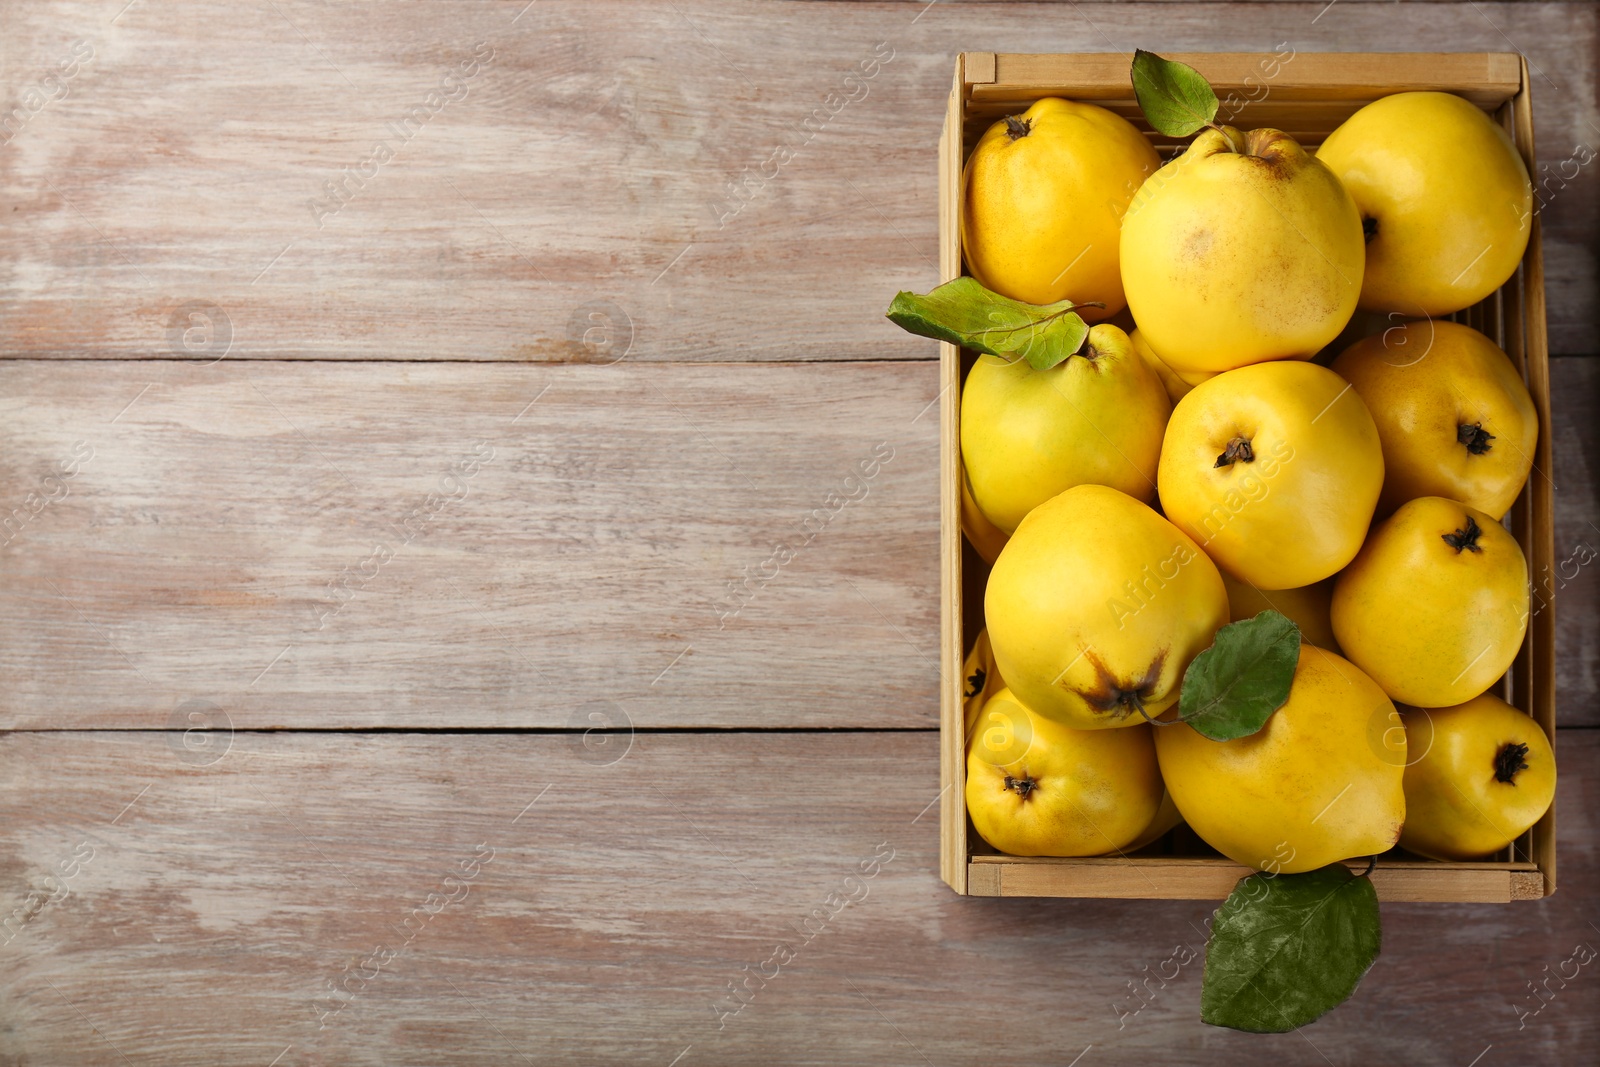 Photo of Tasty ripe quince fruits in crate on wooden table, top view. Space for text